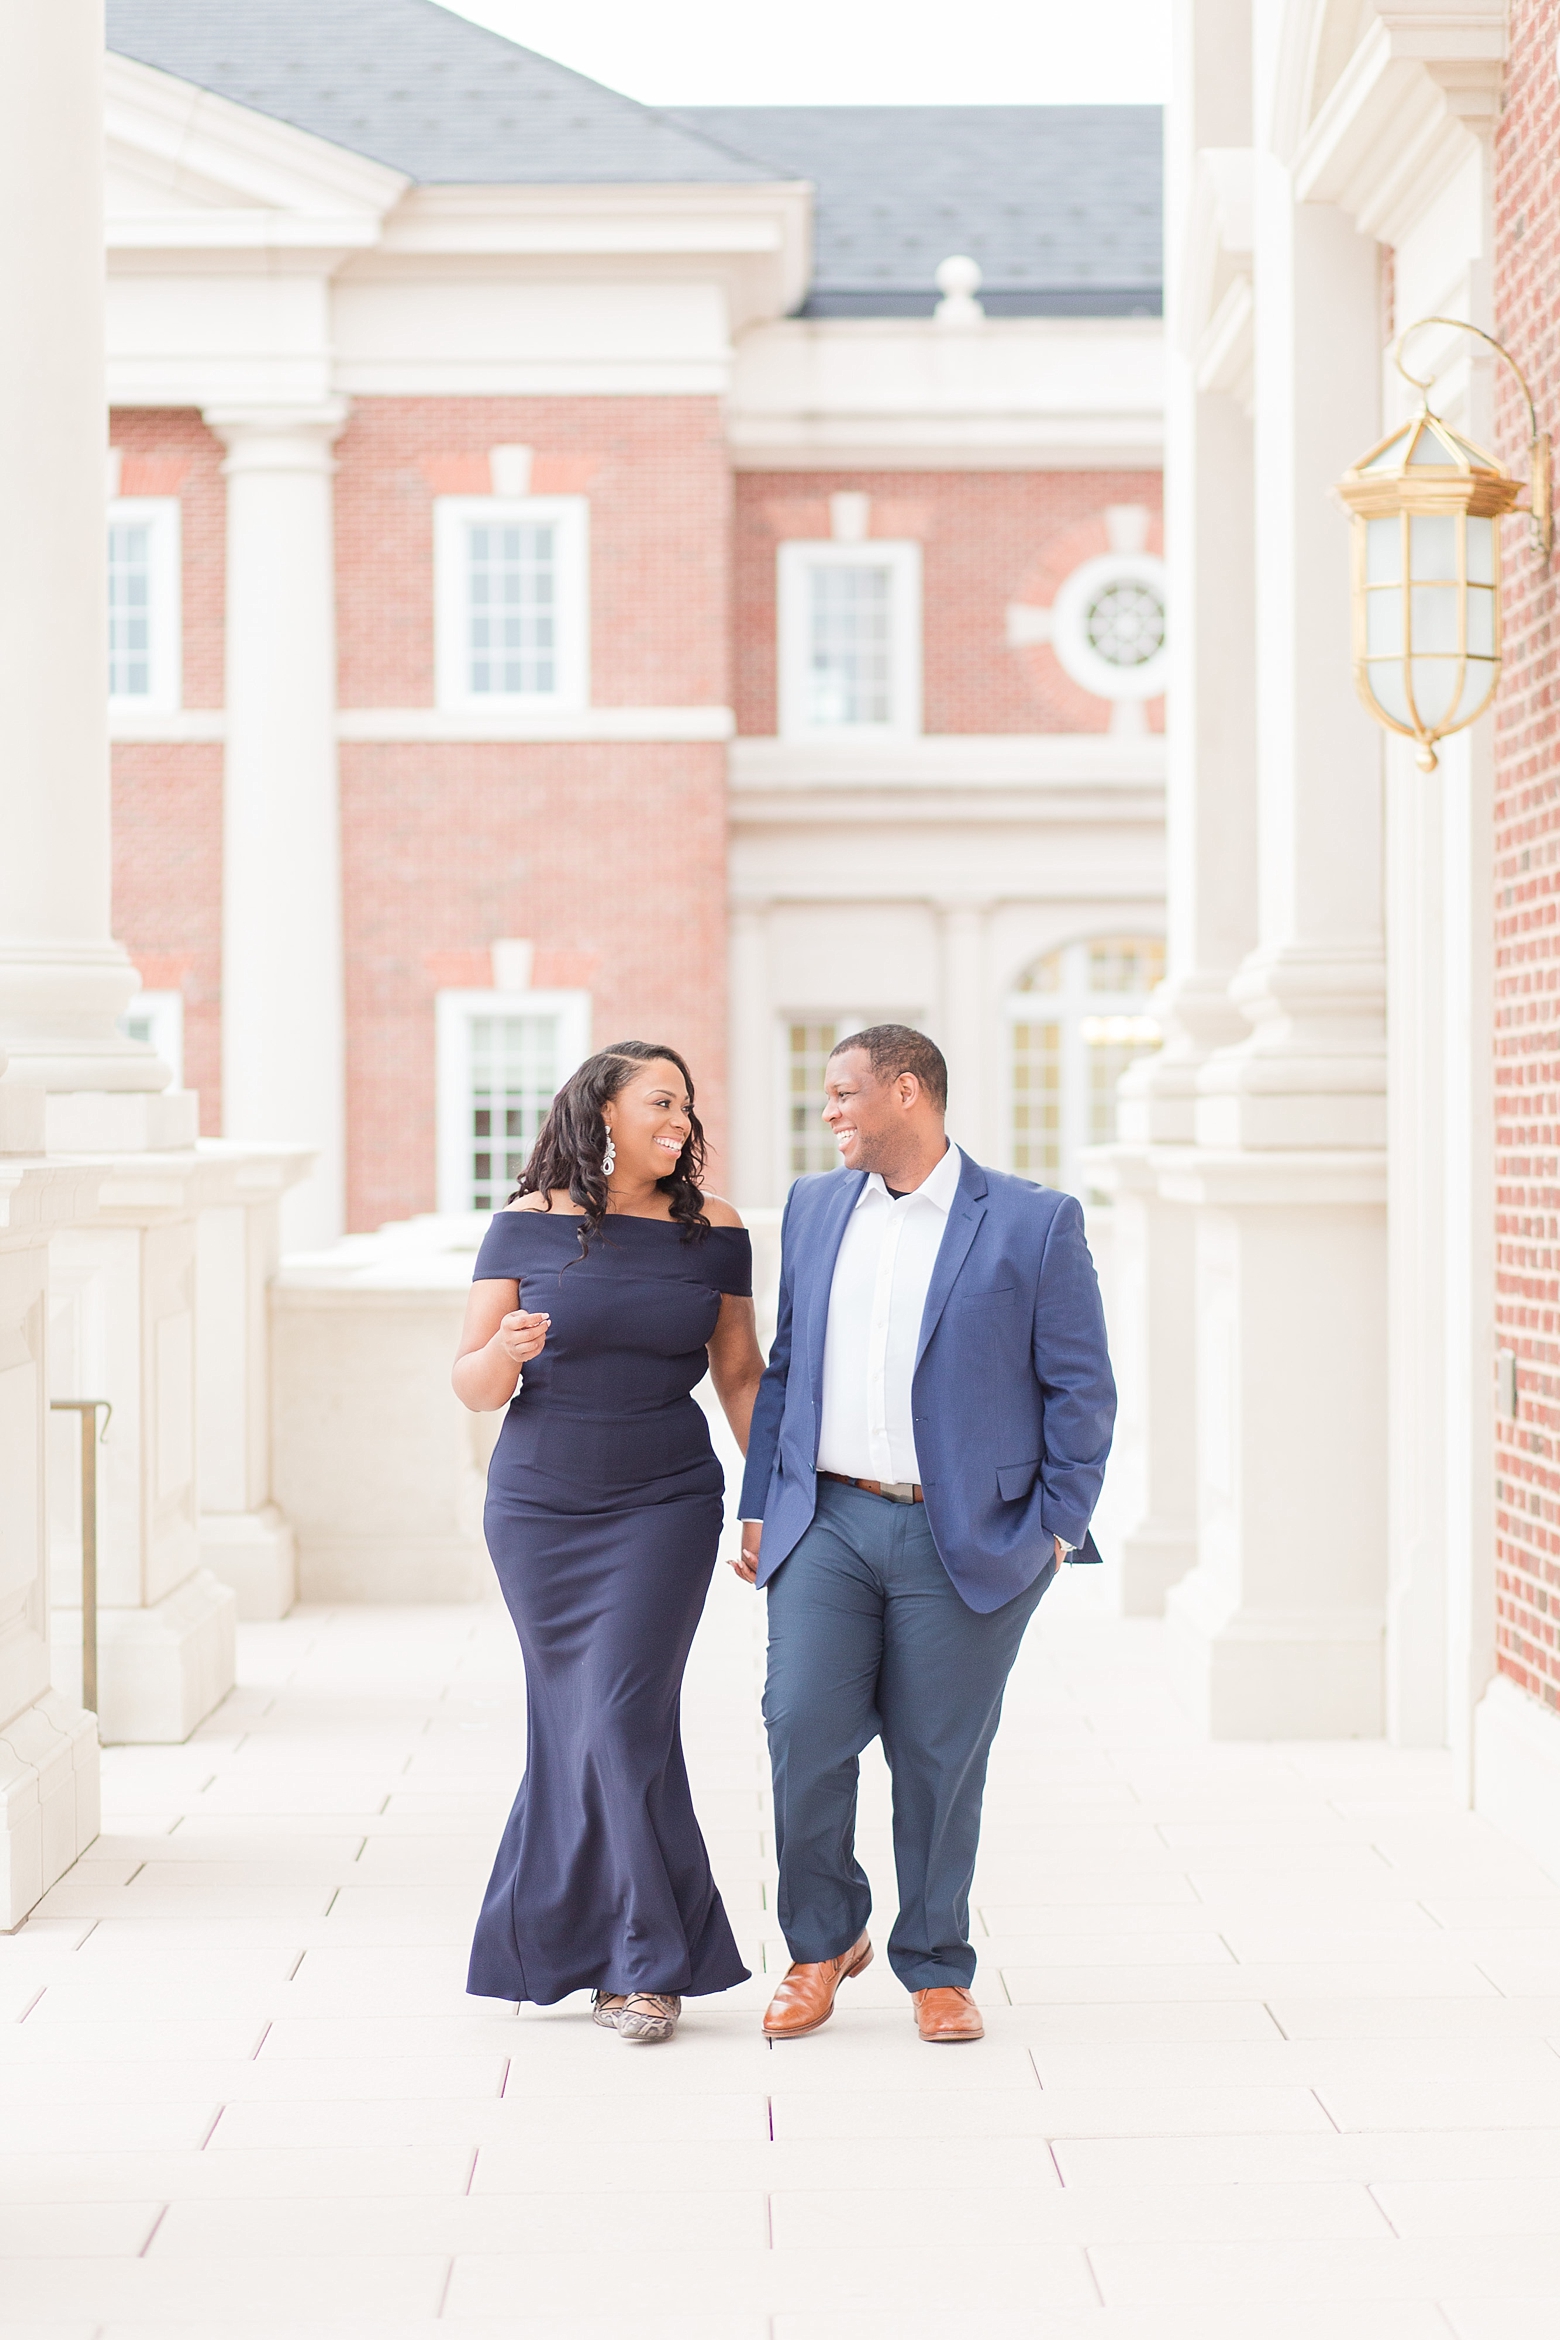 Christopher Newport University Engagement Photography by Angie McPherson Photography